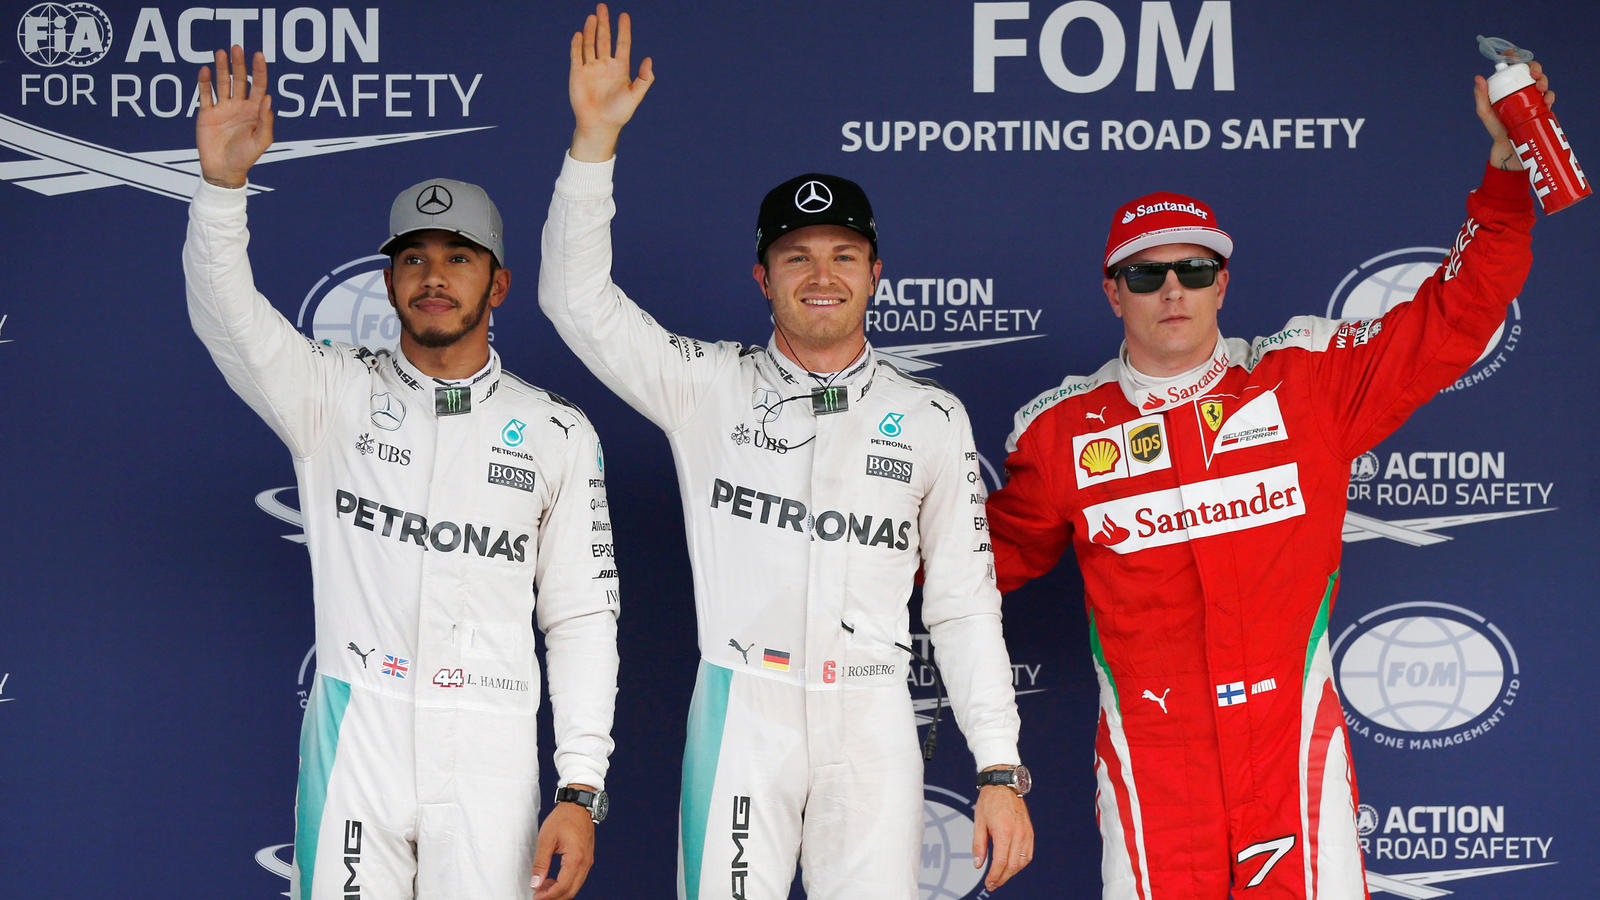 Formula One F1 - Japanese Grand Prix - Suzuka Circuit, Japan - 8/10/16. Mercedes' Lewis Hamilton of Britain, Mercedes' Nico Rosberg of Germany and Ferrari's Kimi Raikkonen of Finland (L-R) wave their hands after the qualifying session. REUTERS/Toru H